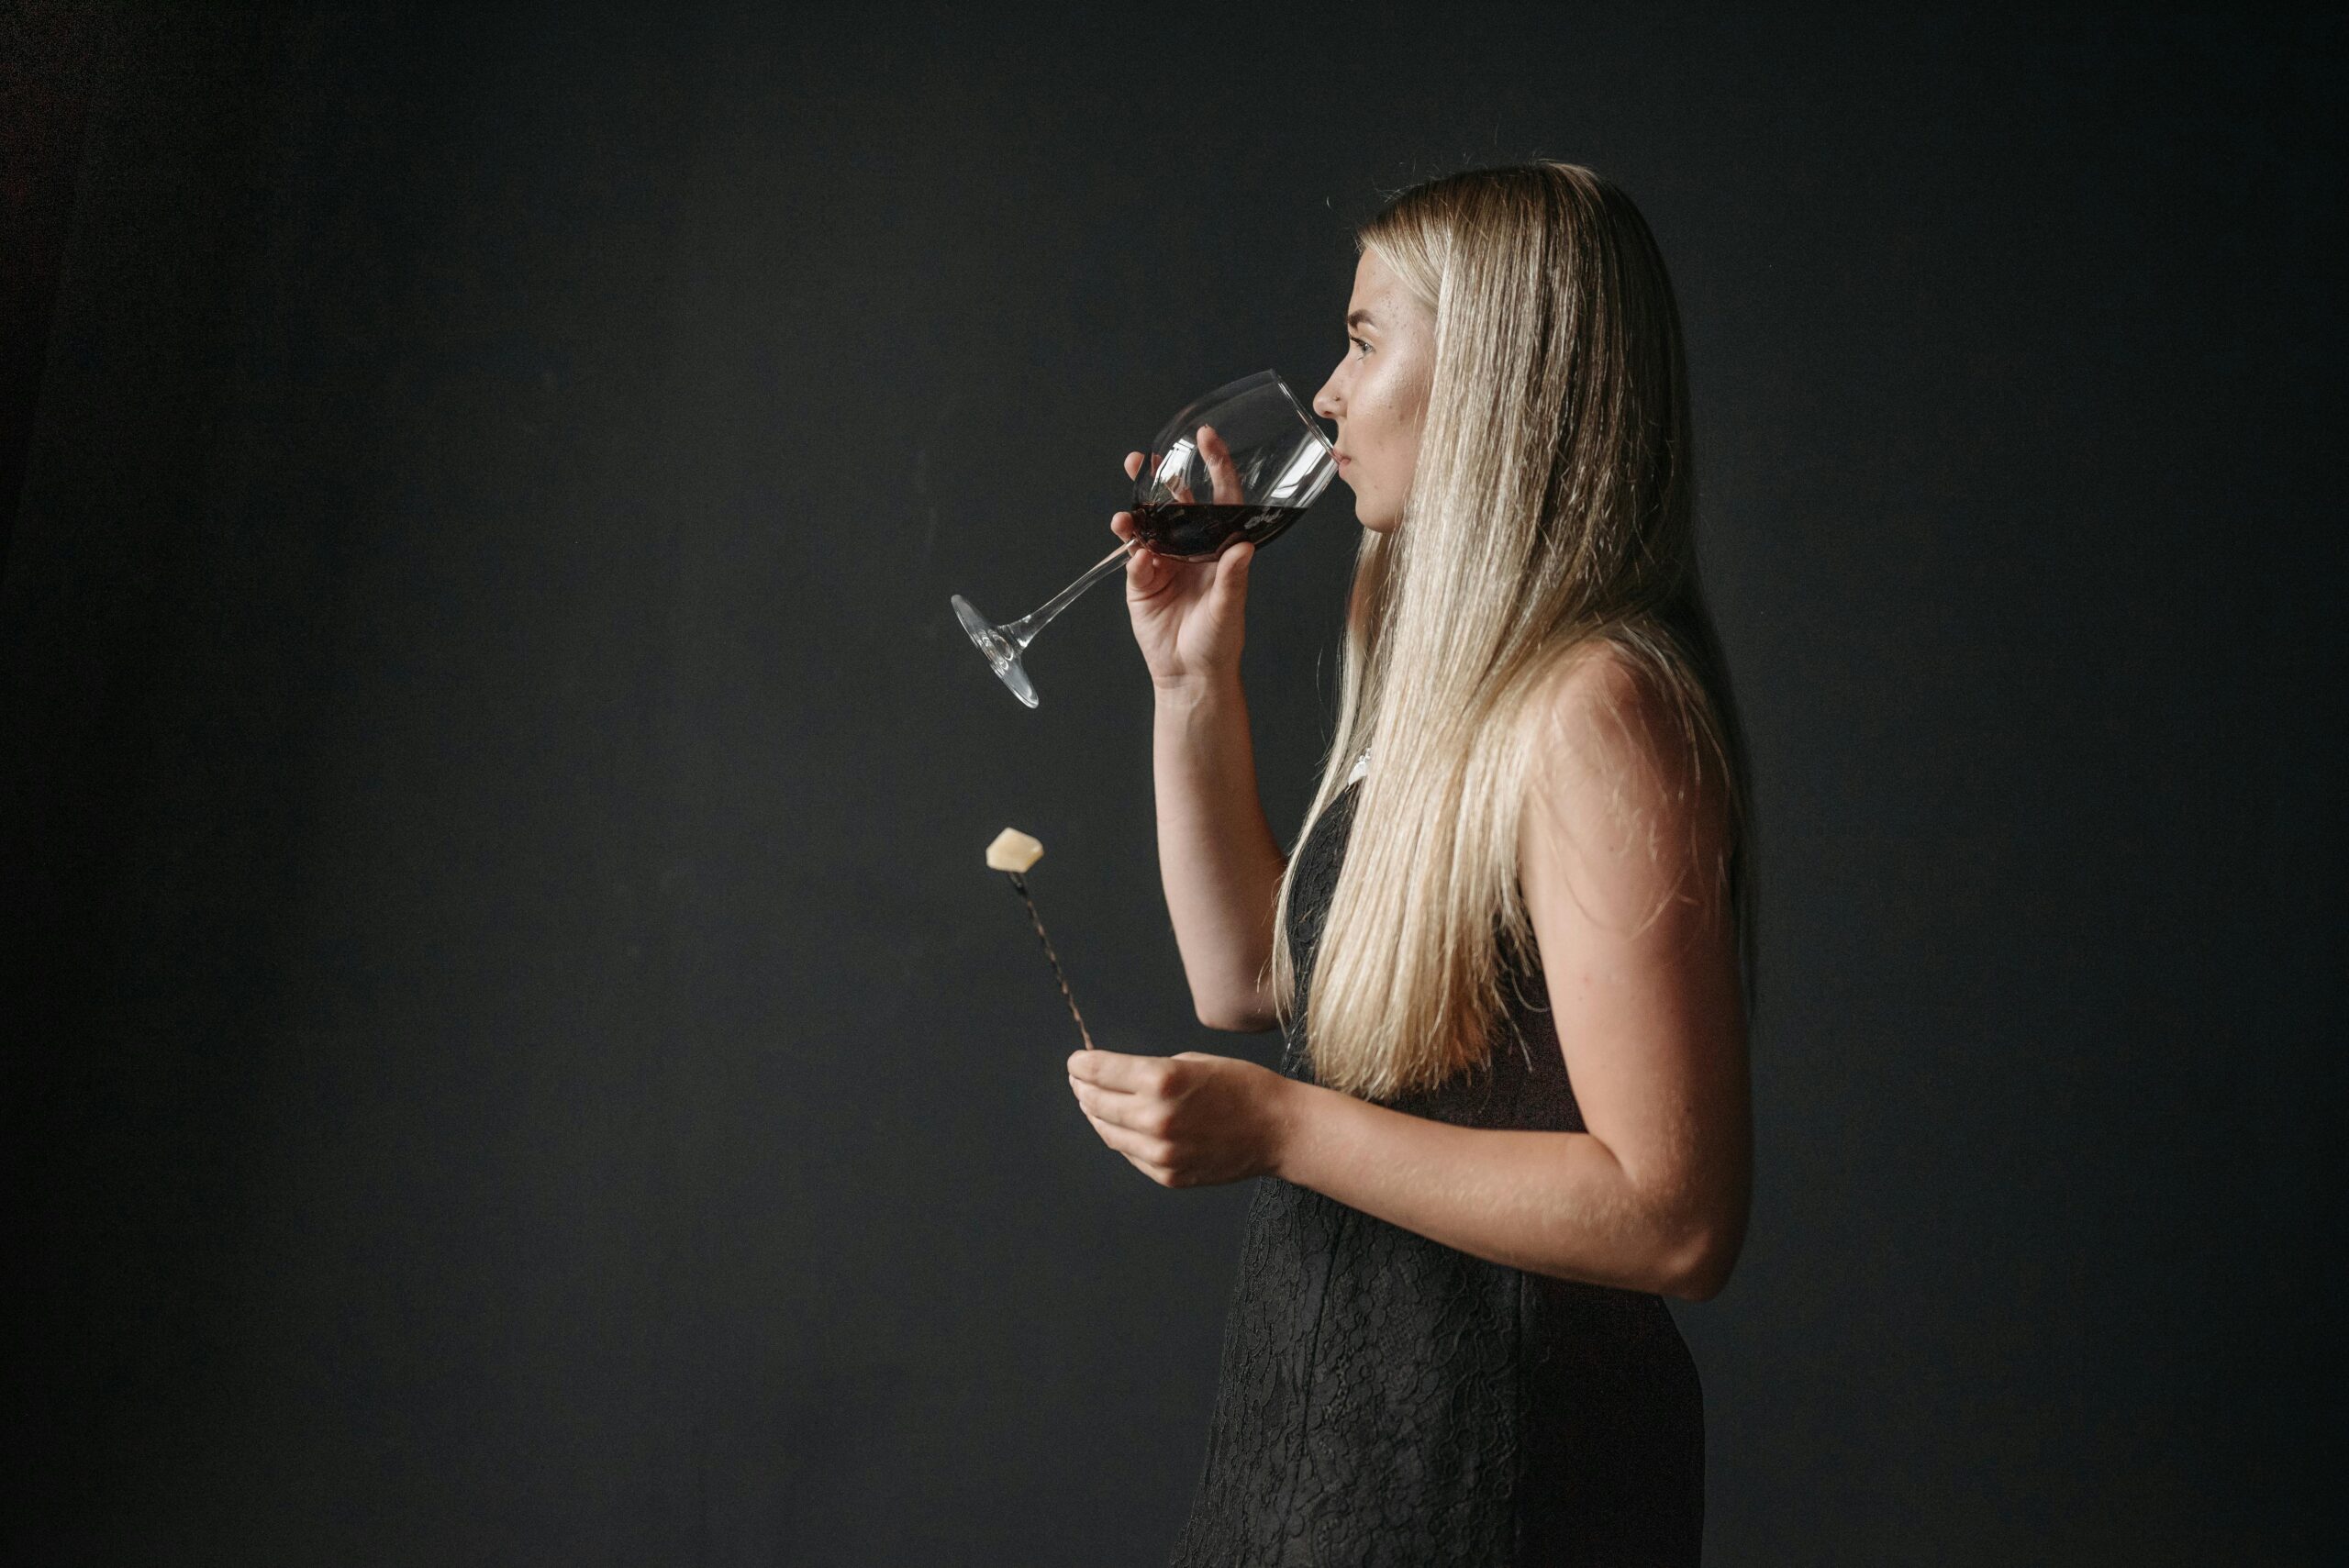 A woman in black dress drinking a glass of wine